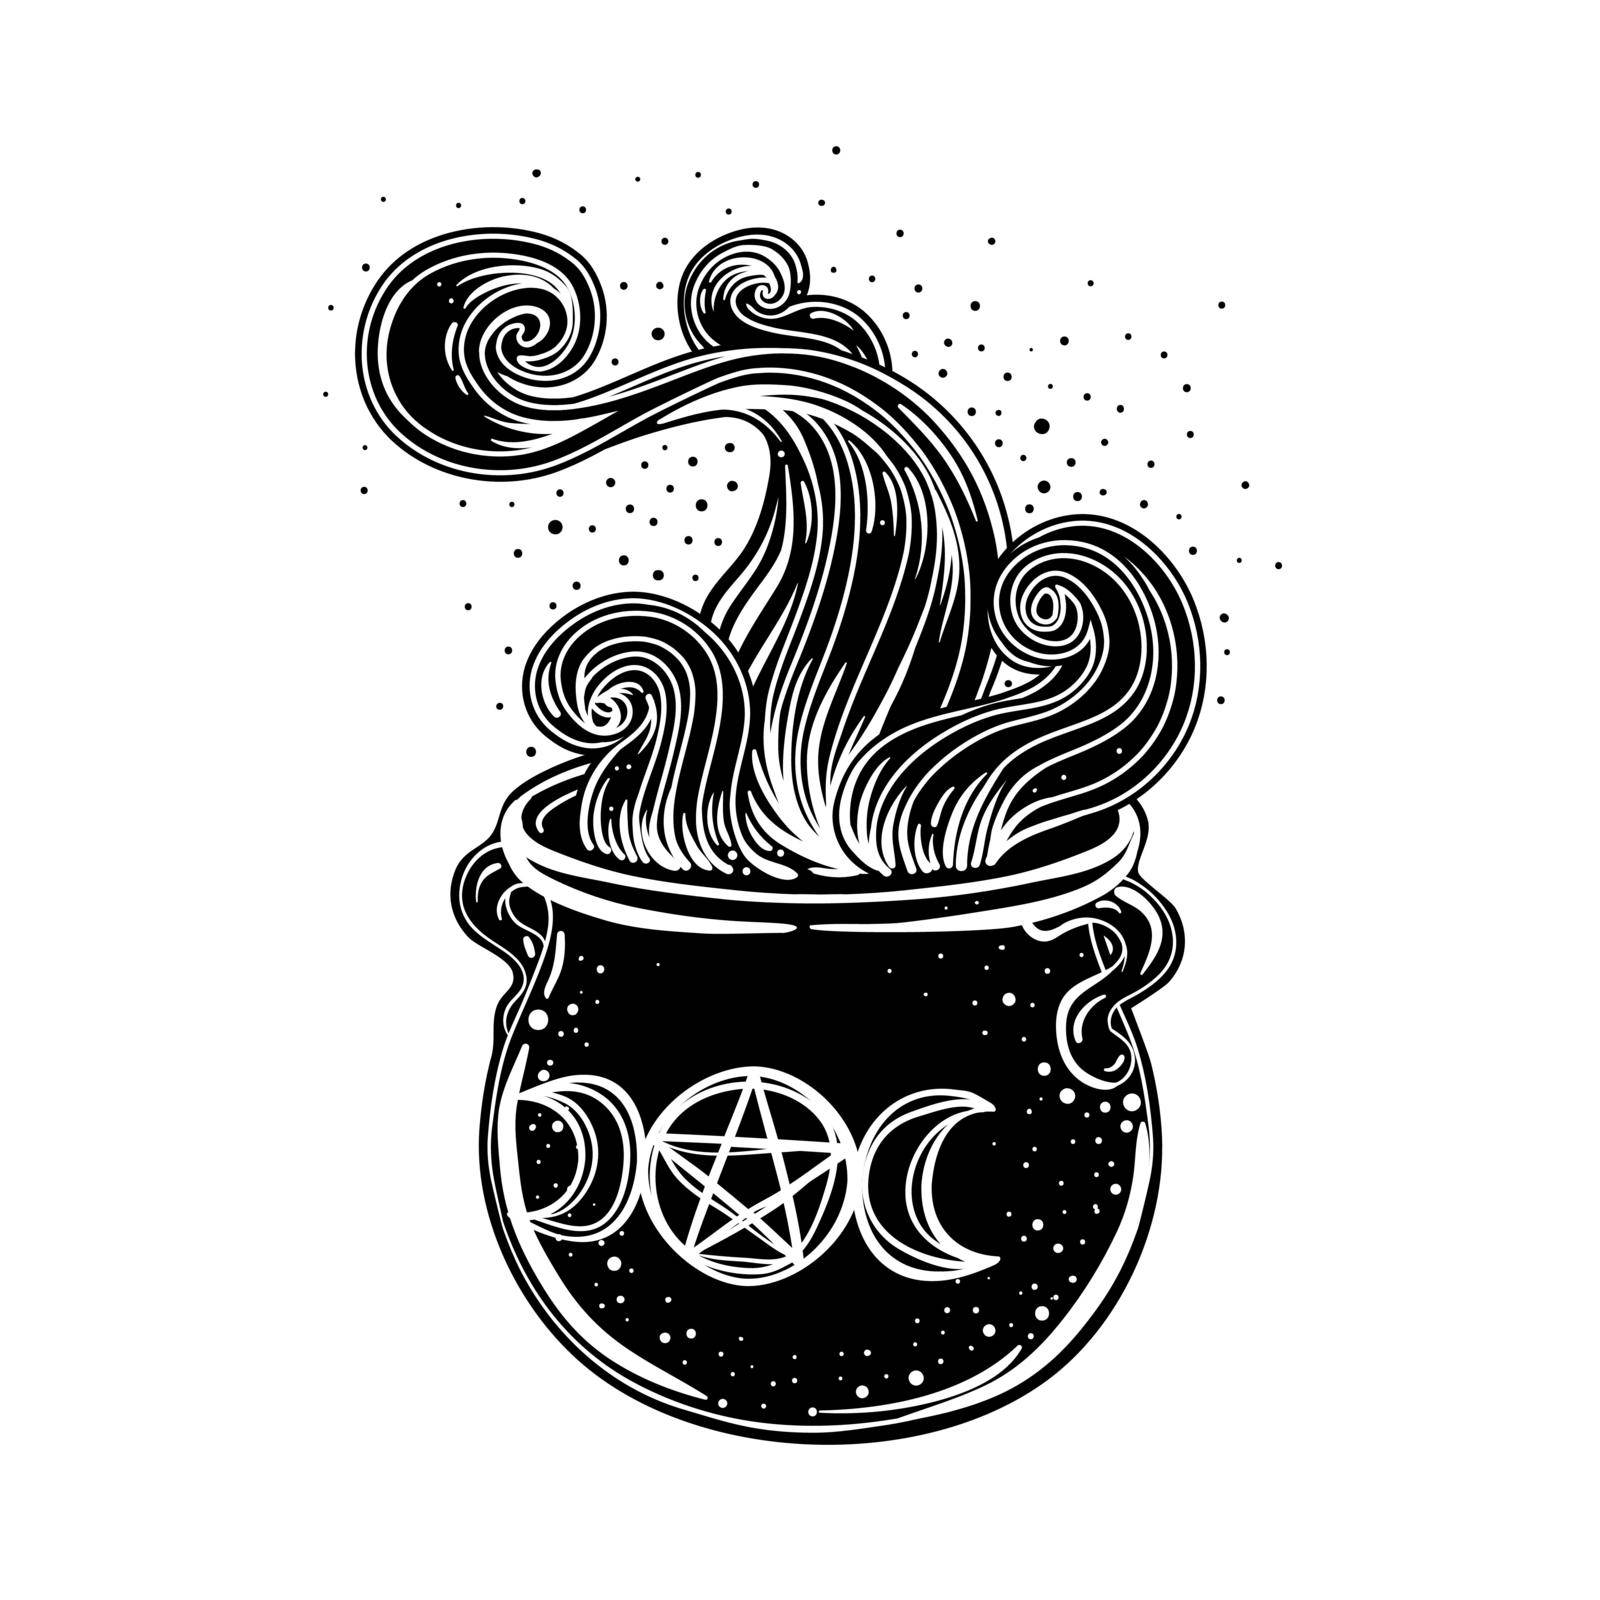 Witches cauldron. Vector isolated illustration in Victorian style. Mediumship divination equipment. flash tattoo drawing. Alchemy, occultism. by varka